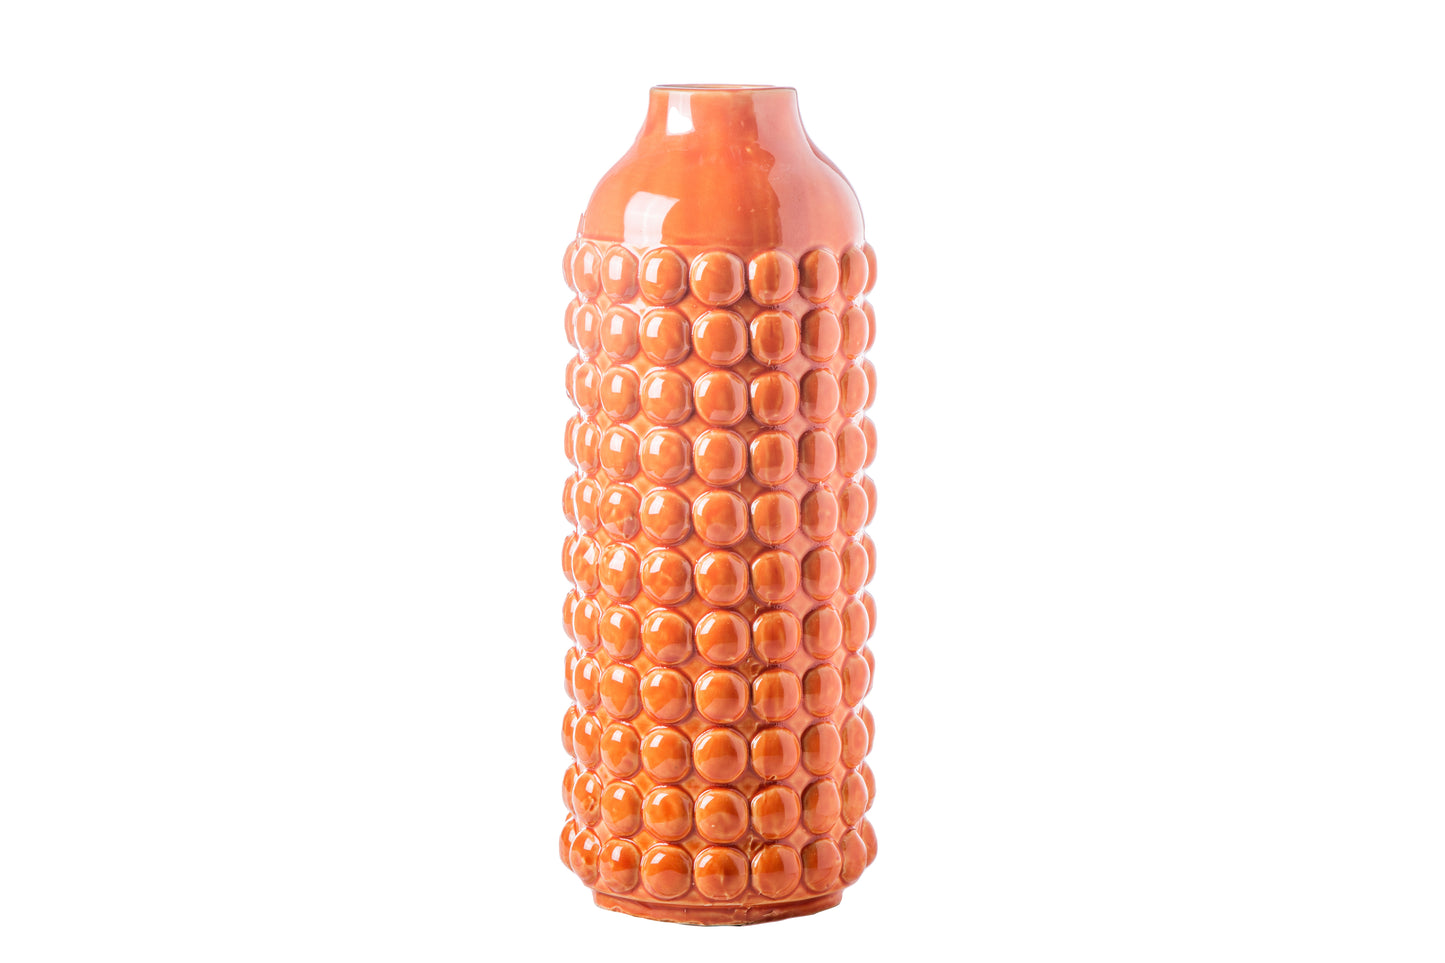 Ceramic Round Vase with Embossed Bubbled Pattern Design Body Matte Finish